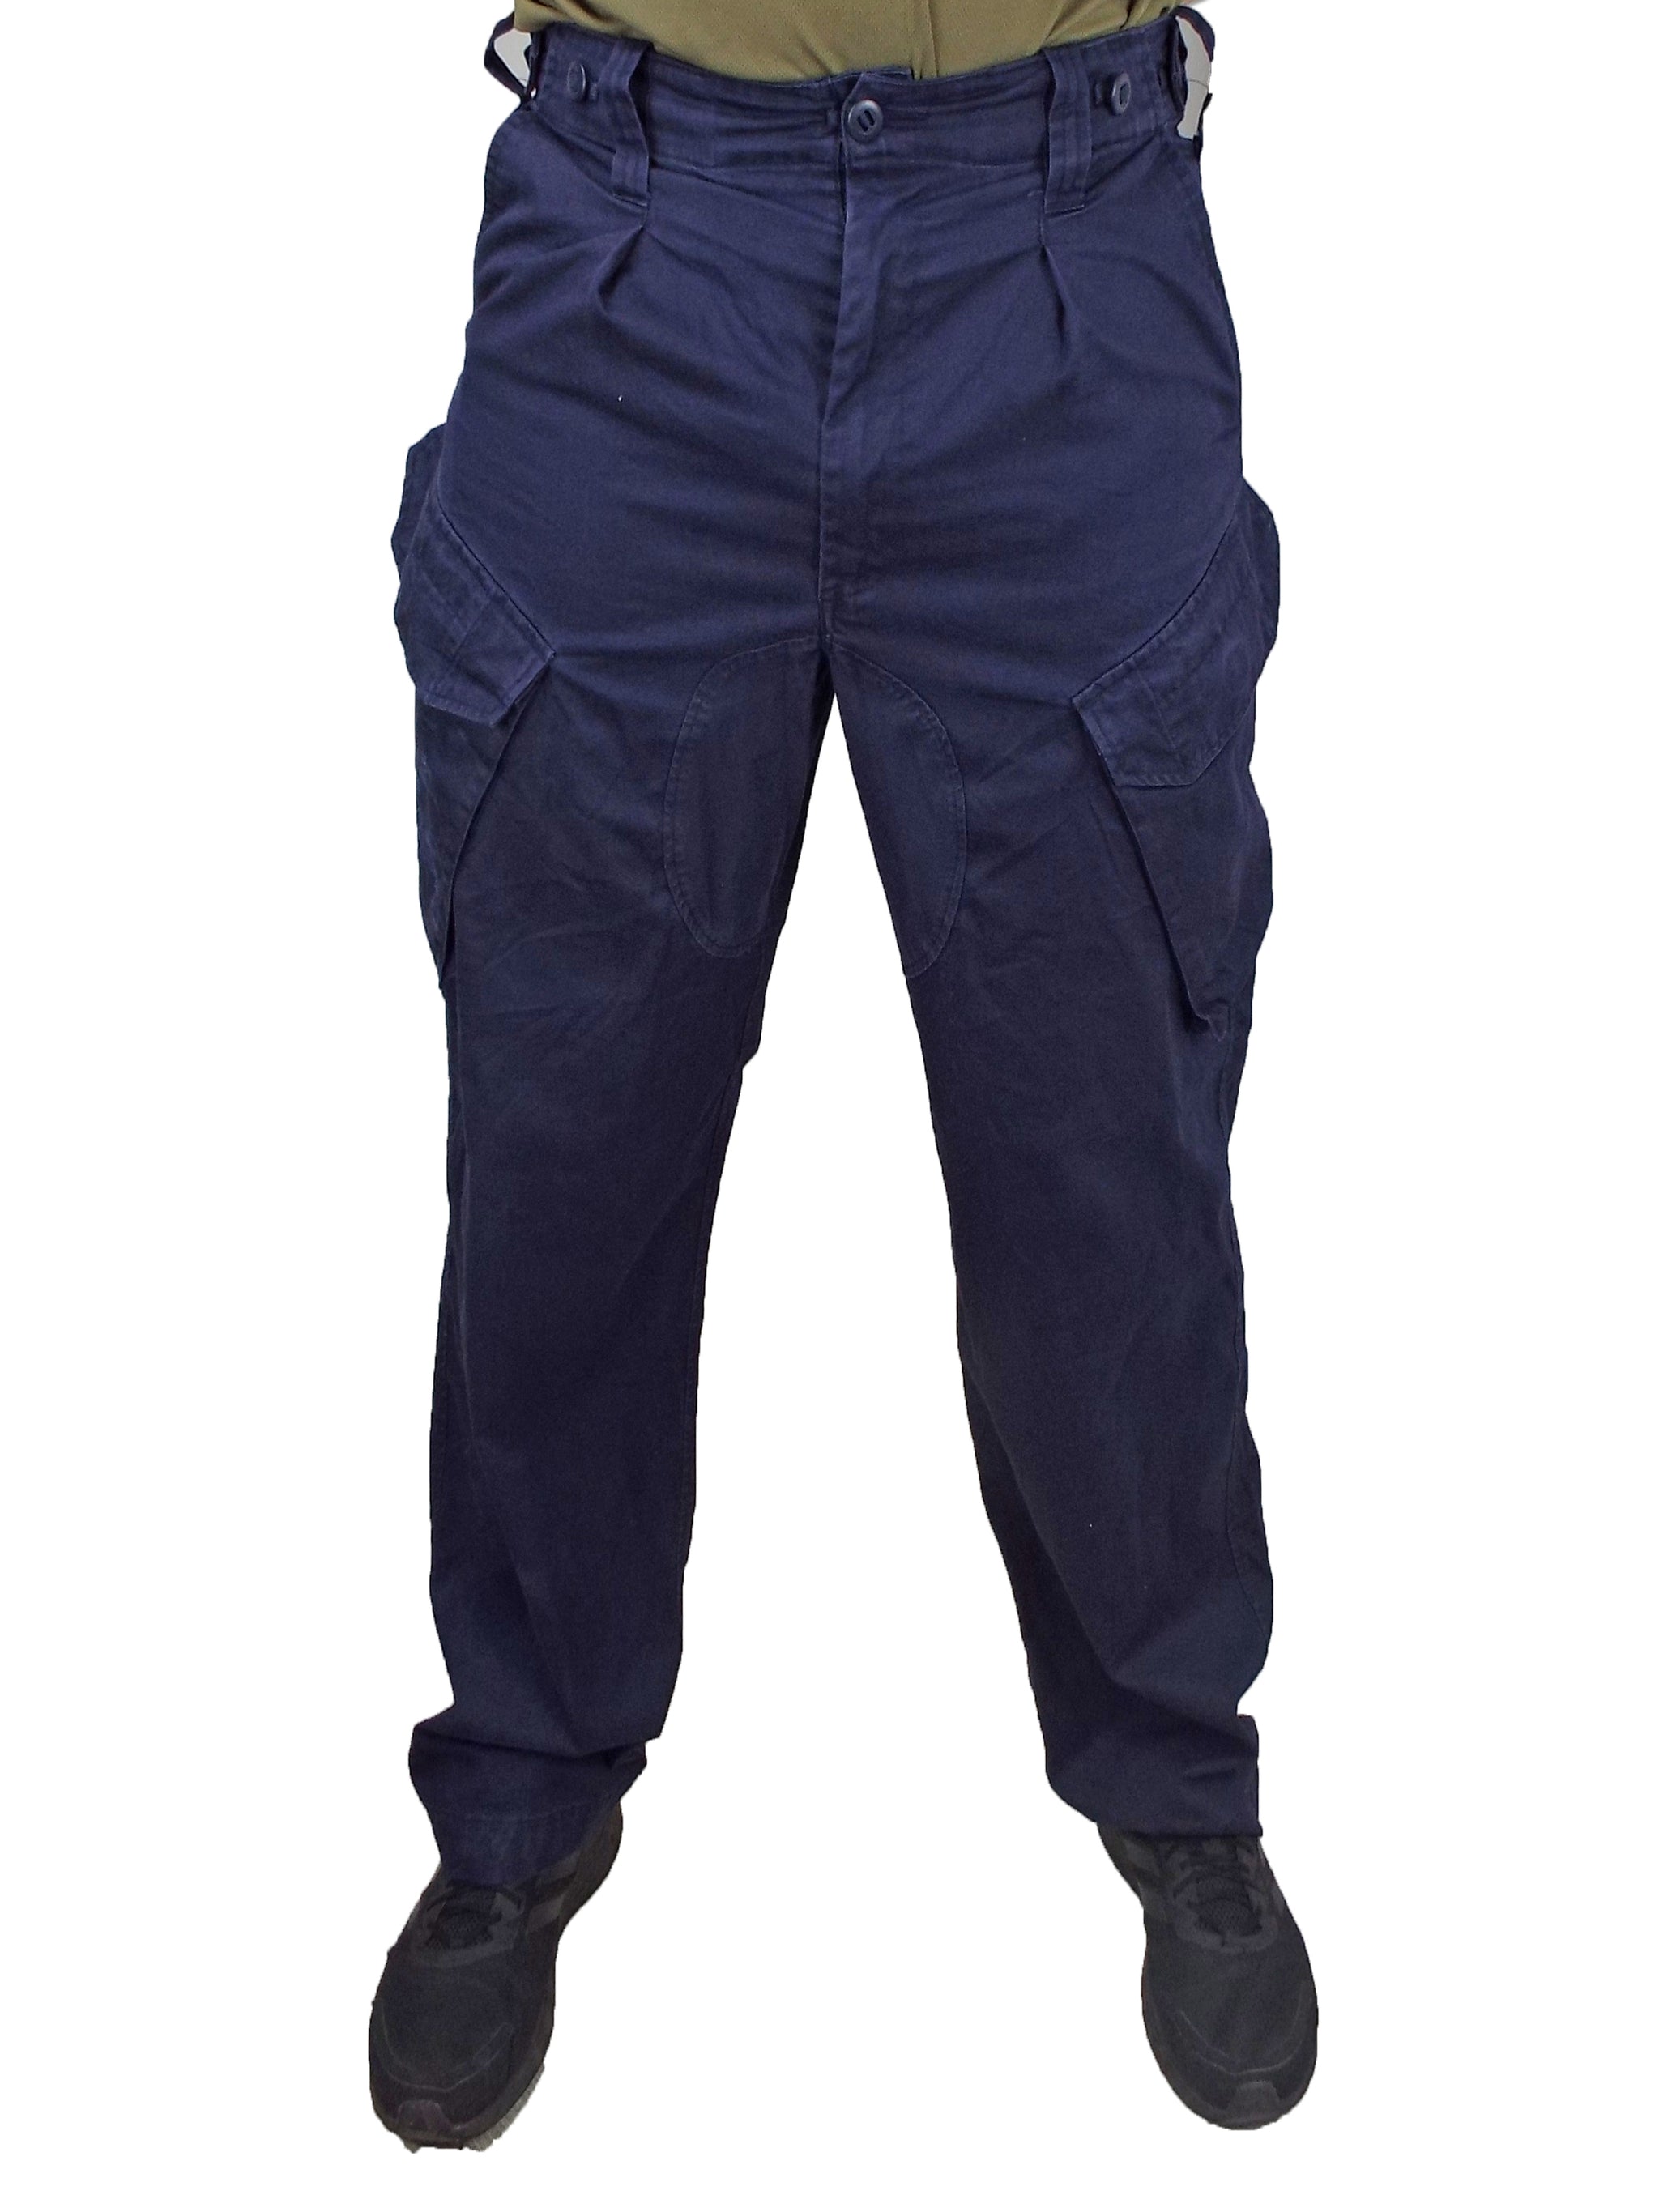 Combat trousers three different designs black navy blue grey